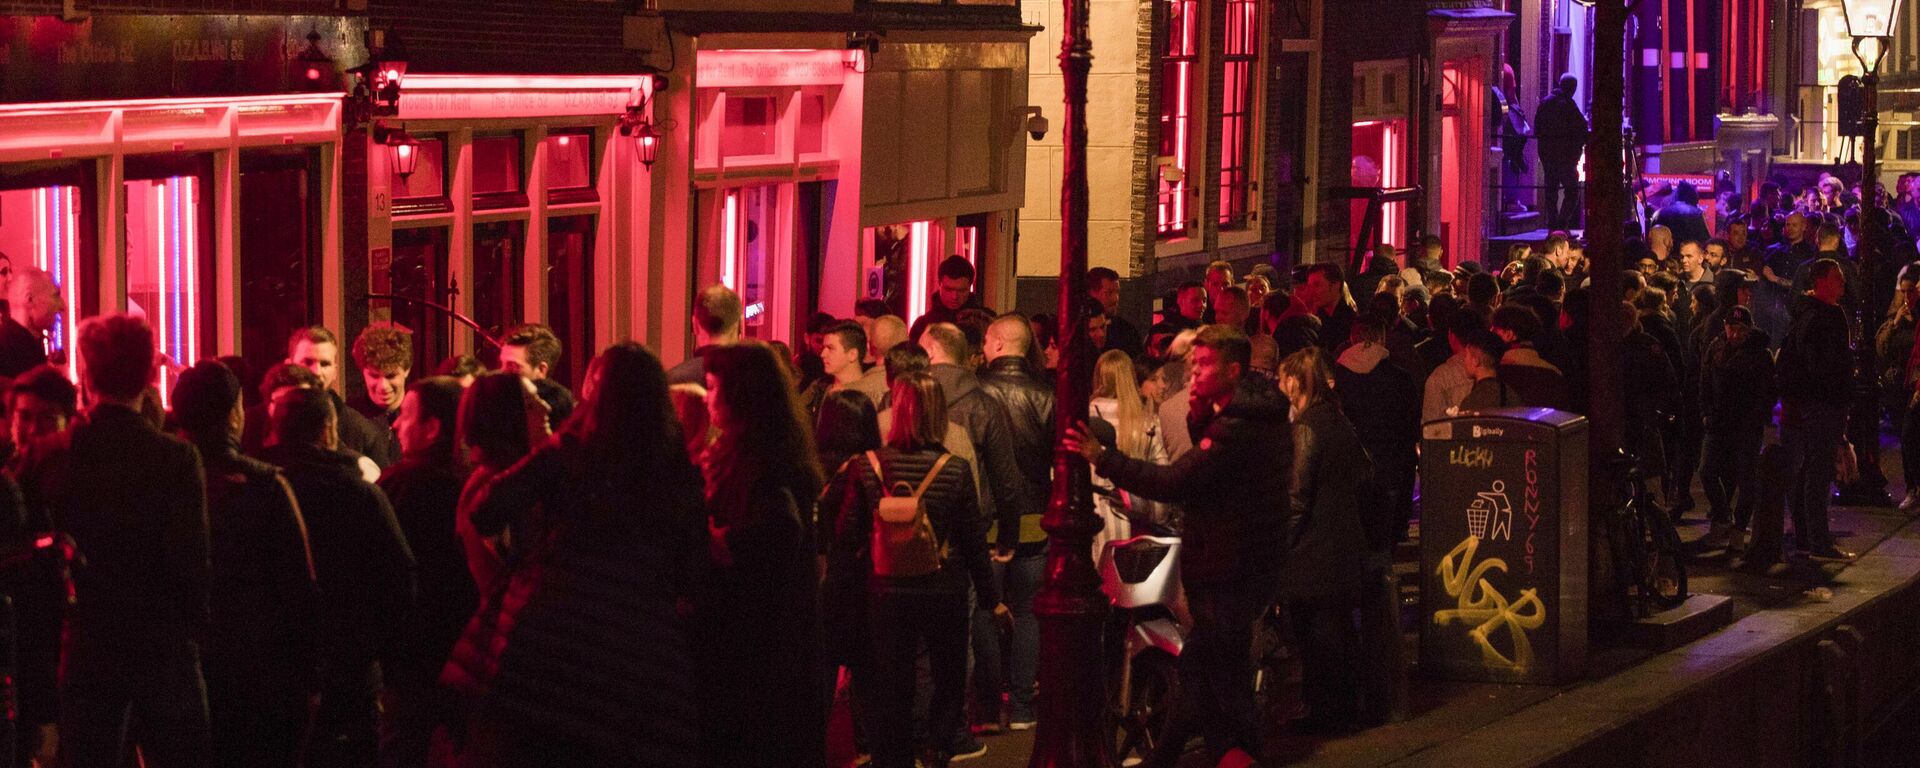 In this Friday March 29, 2019, file image tourists bathing in a red glow emanating from the windows and peep shows' neon lights are packed shoulder to shoulder as they shuffle through the alleys in Amsterdam's red light district, Netherlands. - Sputnik International, 1920, 29.03.2023